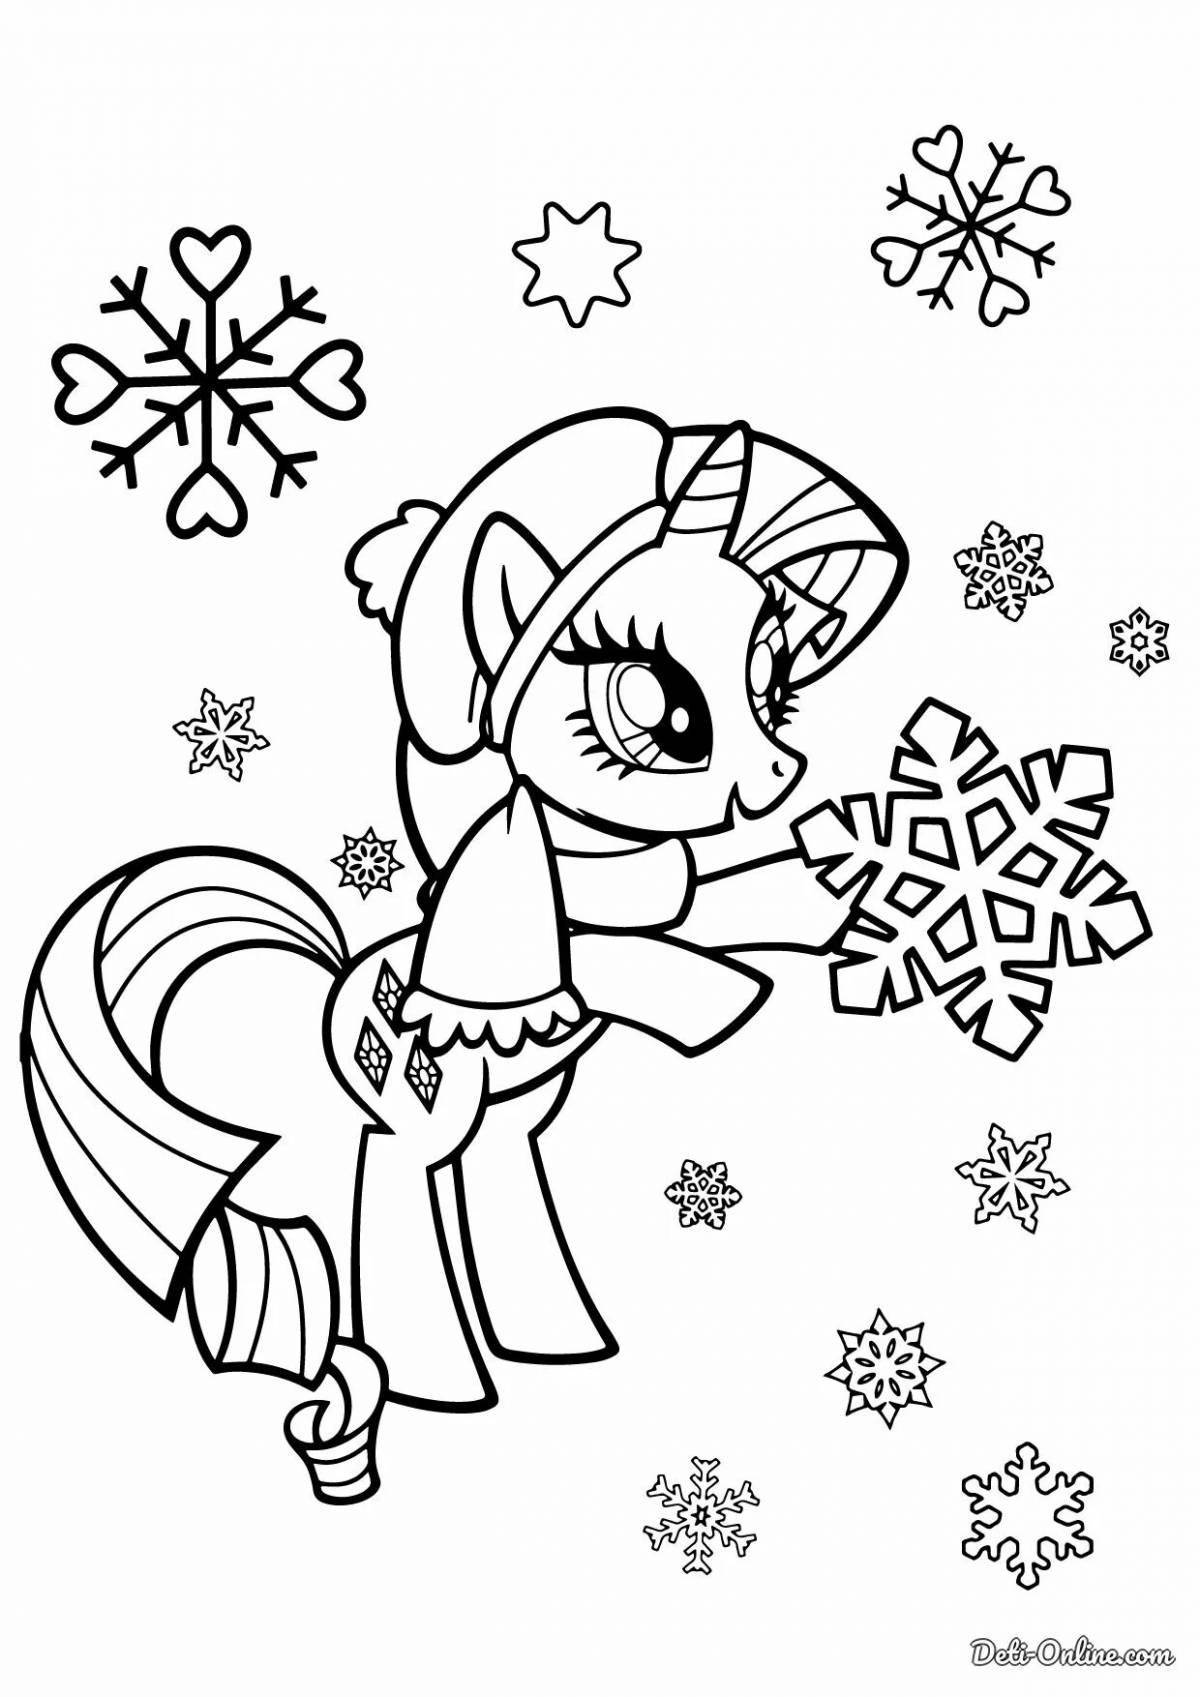 Gorgeous Christmas coloring book for girls